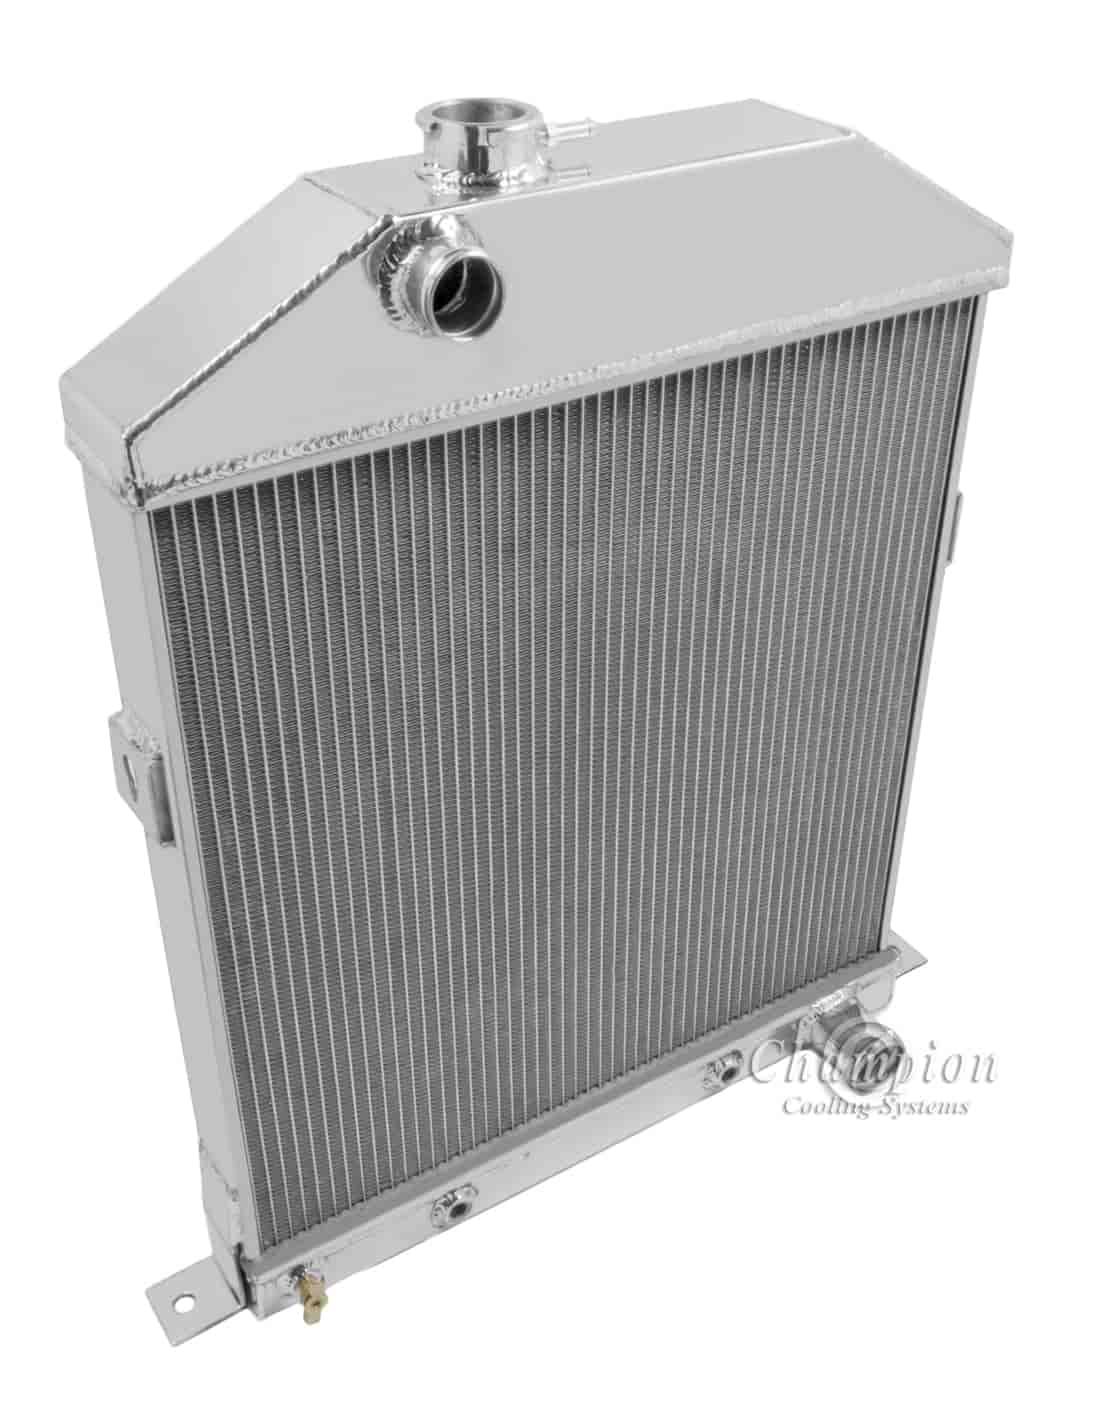 All-Aluminum Radiator 1942-1948 Ford/Mercury Coupe with Chevy Configuration